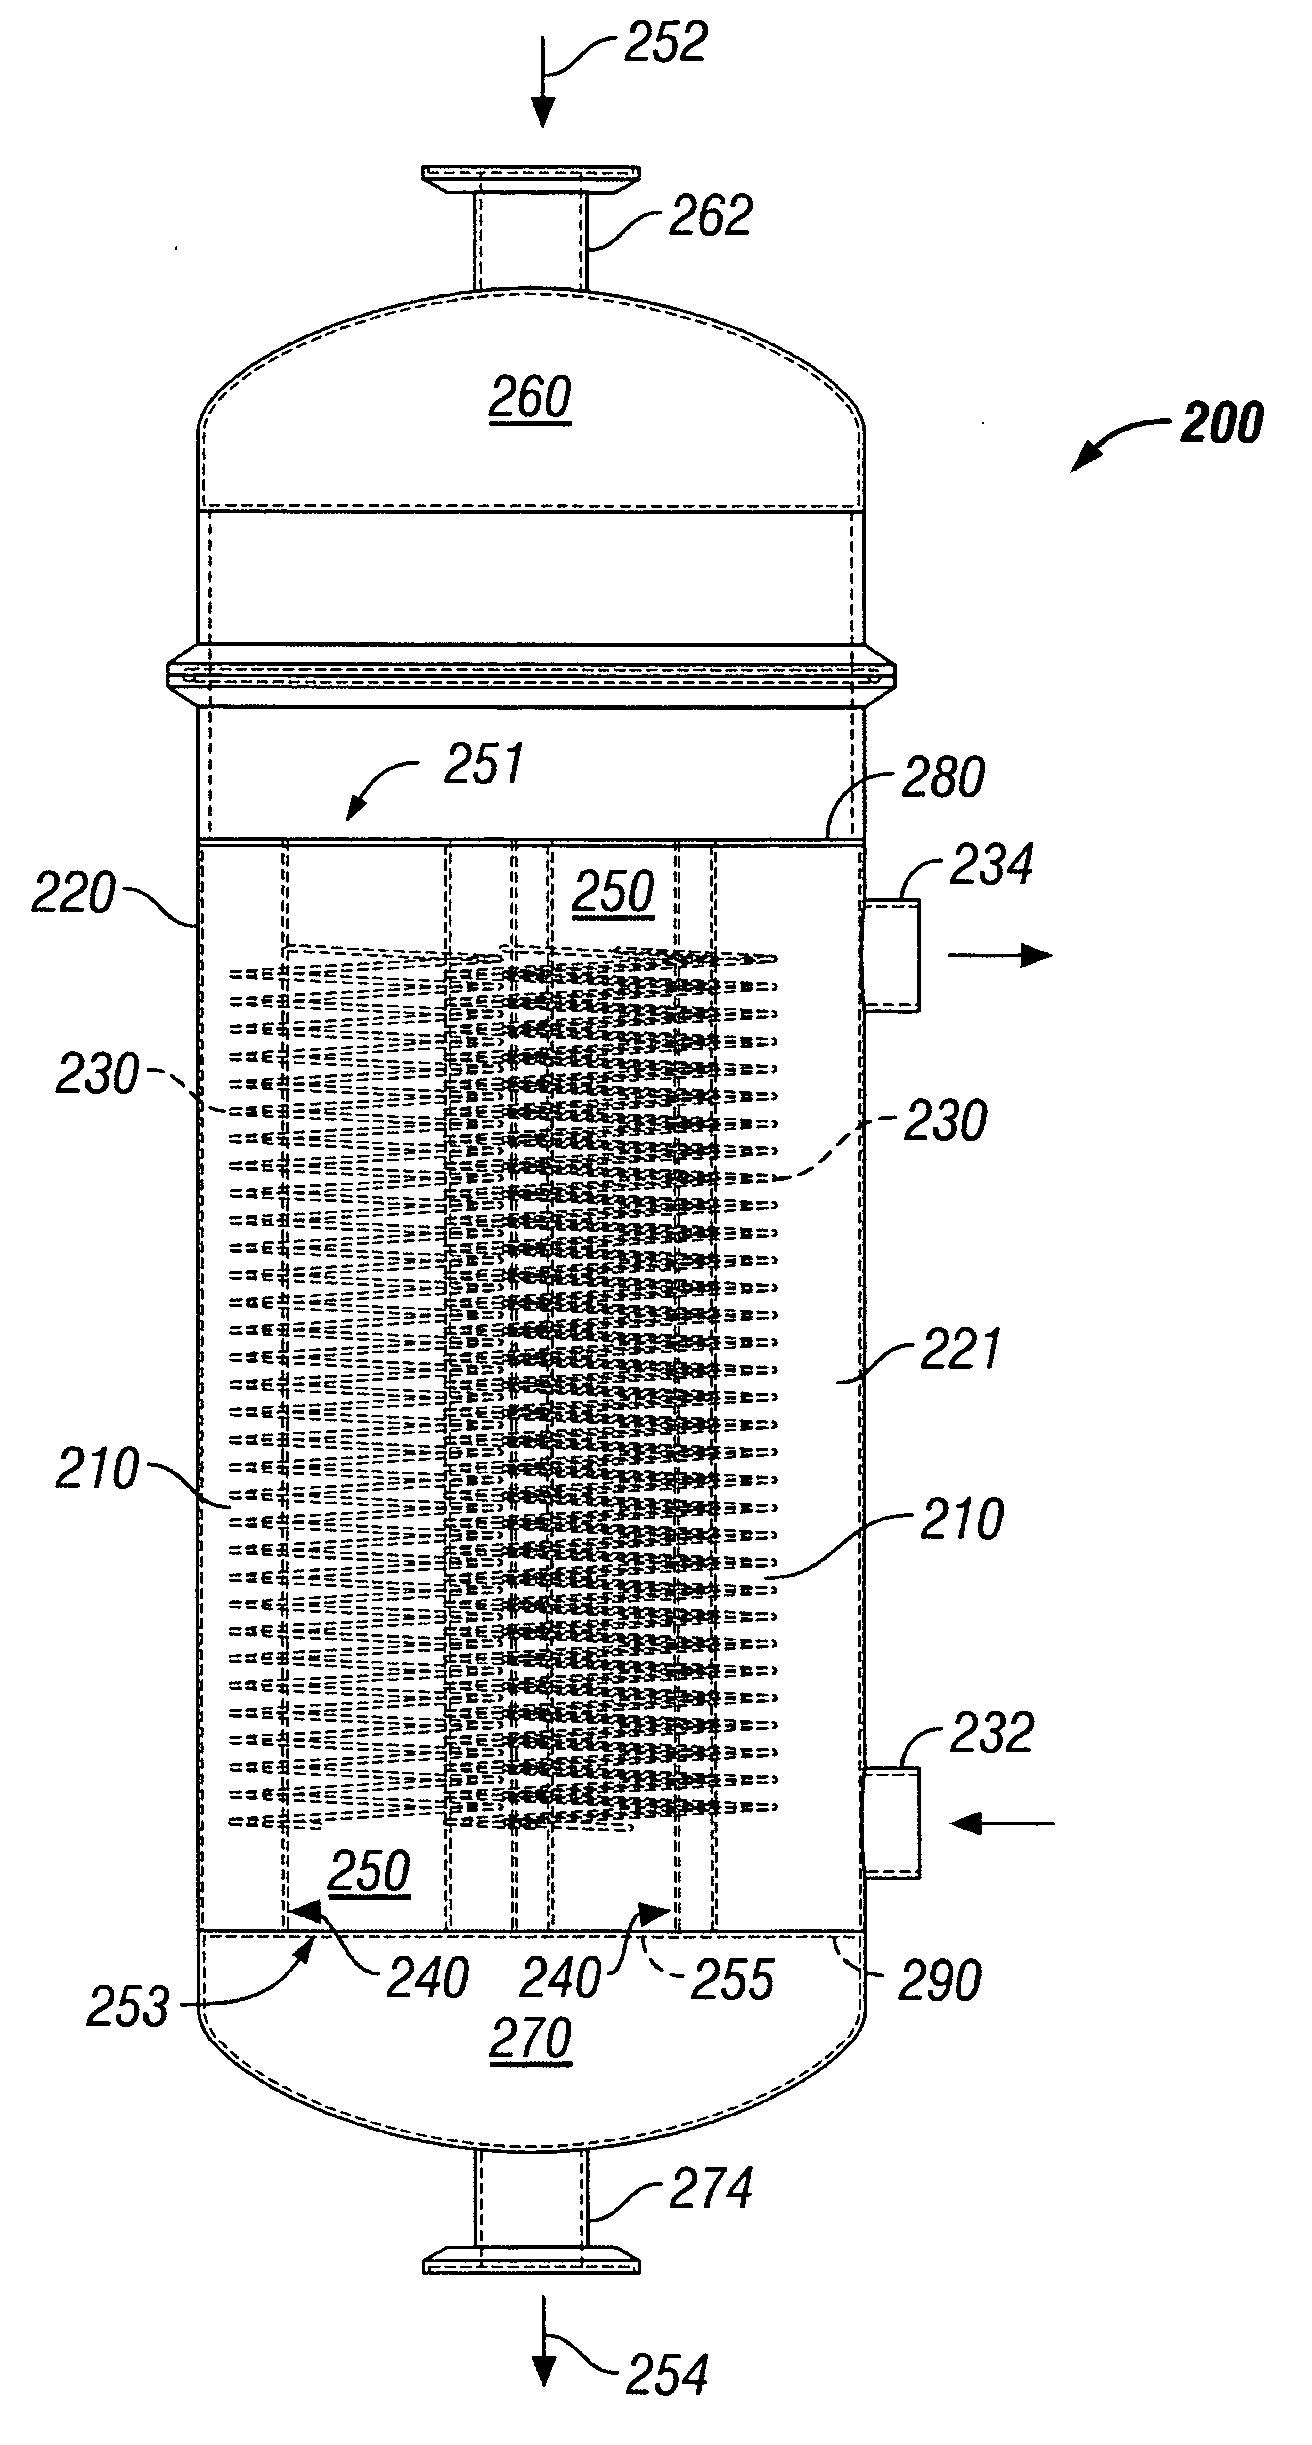 Apparatus and method for preferential oxidation of carbon monoxide